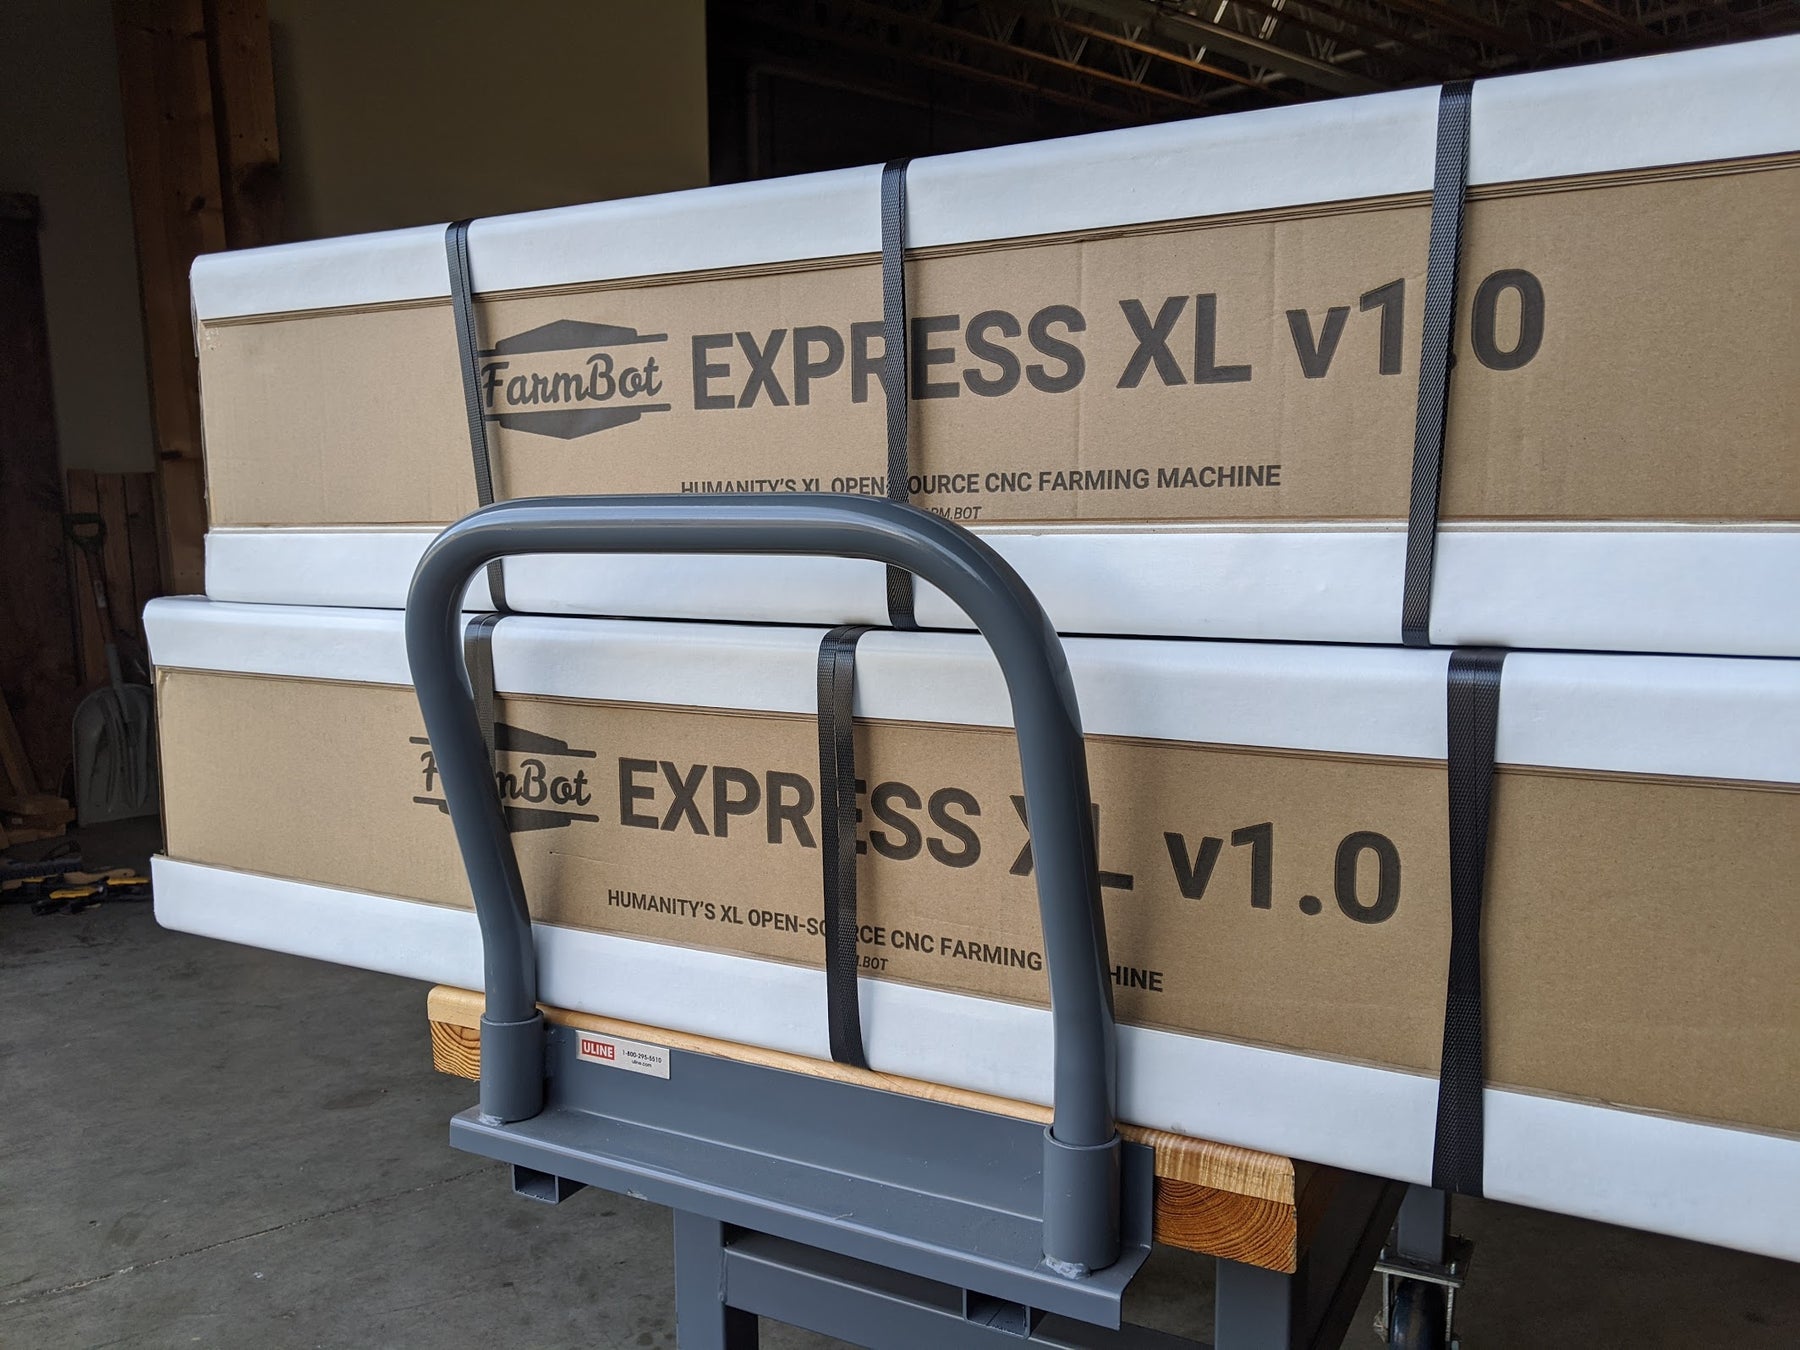 First FarmBot Express and Express XL Deliveries